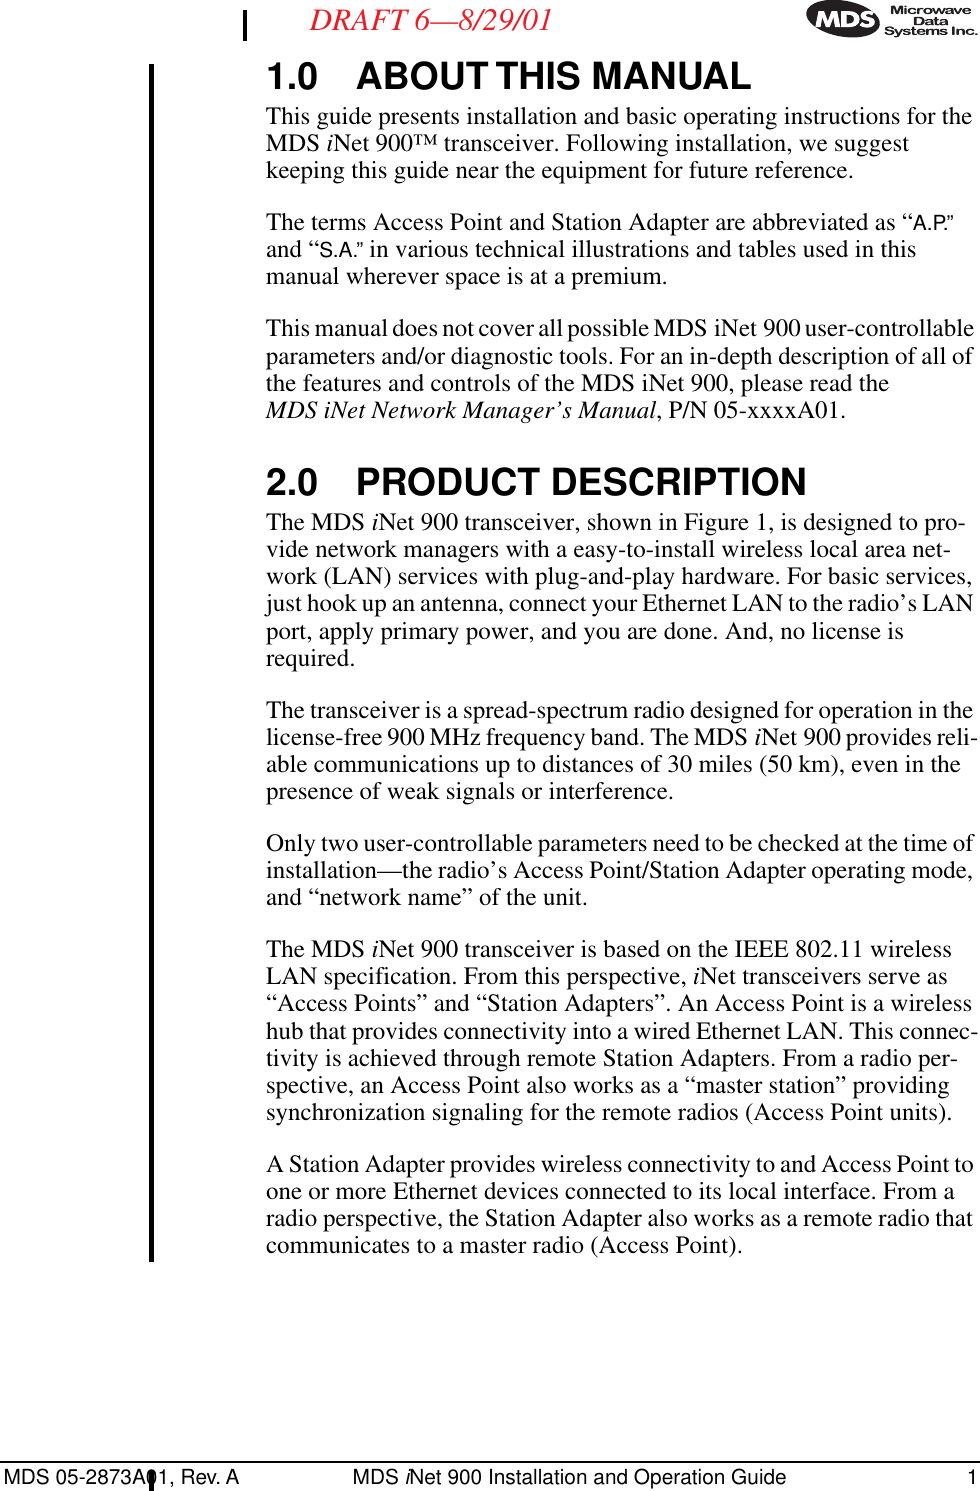  MDS 05-2873A01, Rev. A MDS  i Net 900 Installation and Operation Guide 1 DRAFT 6—8/29/01 1.0 ABOUT THIS MANUAL This guide presents installation and basic operating instructions for the MDS  i Net 900™ transceiver. Following installation, we suggest keeping this guide near the equipment for future reference.The terms Access Point and Station Adapter are abbreviated as “ A.P.”  and “ S.A.”  in various technical illustrations and tables used in this manual wherever space is at a premium.This manual does not cover all possible MDS iNet 900 user-controllable parameters and/or diagnostic tools. For an in-depth description of all of the features and controls of the MDS iNet 900, please read the  MDS iNet Network Manager’s Manual , P/N 05-xxxxA01. 2.0 PRODUCT DESCRIPTION The MDS  i Net 900 transceiver, shown in Figure 1, is designed to pro-vide network managers with a easy-to-install wireless local area net-work (LAN) services with plug-and-play hardware. For basic services, just hook up an antenna, connect your Ethernet LAN to the radio’s LAN port, apply primary power, and you are done. And, no license is required.The transceiver is a spread-spectrum radio designed for operation in the license-free 900 MHz frequency band. The MDS  i Net 900 provides reli-able communications up to distances of 30 miles (50 km), even in the presence of weak signals or interference.Only two user-controllable parameters need to be checked at the time of installation—the radio’s Access Point/Station Adapter operating mode, and “network name” of the unit.The MDS  i Net 900 transceiver is based on the IEEE 802.11 wireless LAN specification. From this perspective,  i Net transceivers serve as “Access Points” and “Station Adapters”. An Access Point is a wireless hub that provides connectivity into a wired Ethernet LAN. This connec-tivity is achieved through remote Station Adapters. From a radio per-spective, an Access Point also works as a “master station” providing synchronization signaling for the remote radios (Access Point units).A Station Adapter provides wireless connectivity to and Access Point to one or more Ethernet devices connected to its local interface. From a radio perspective, the Station Adapter also works as a remote radio that communicates to a master radio (Access Point).